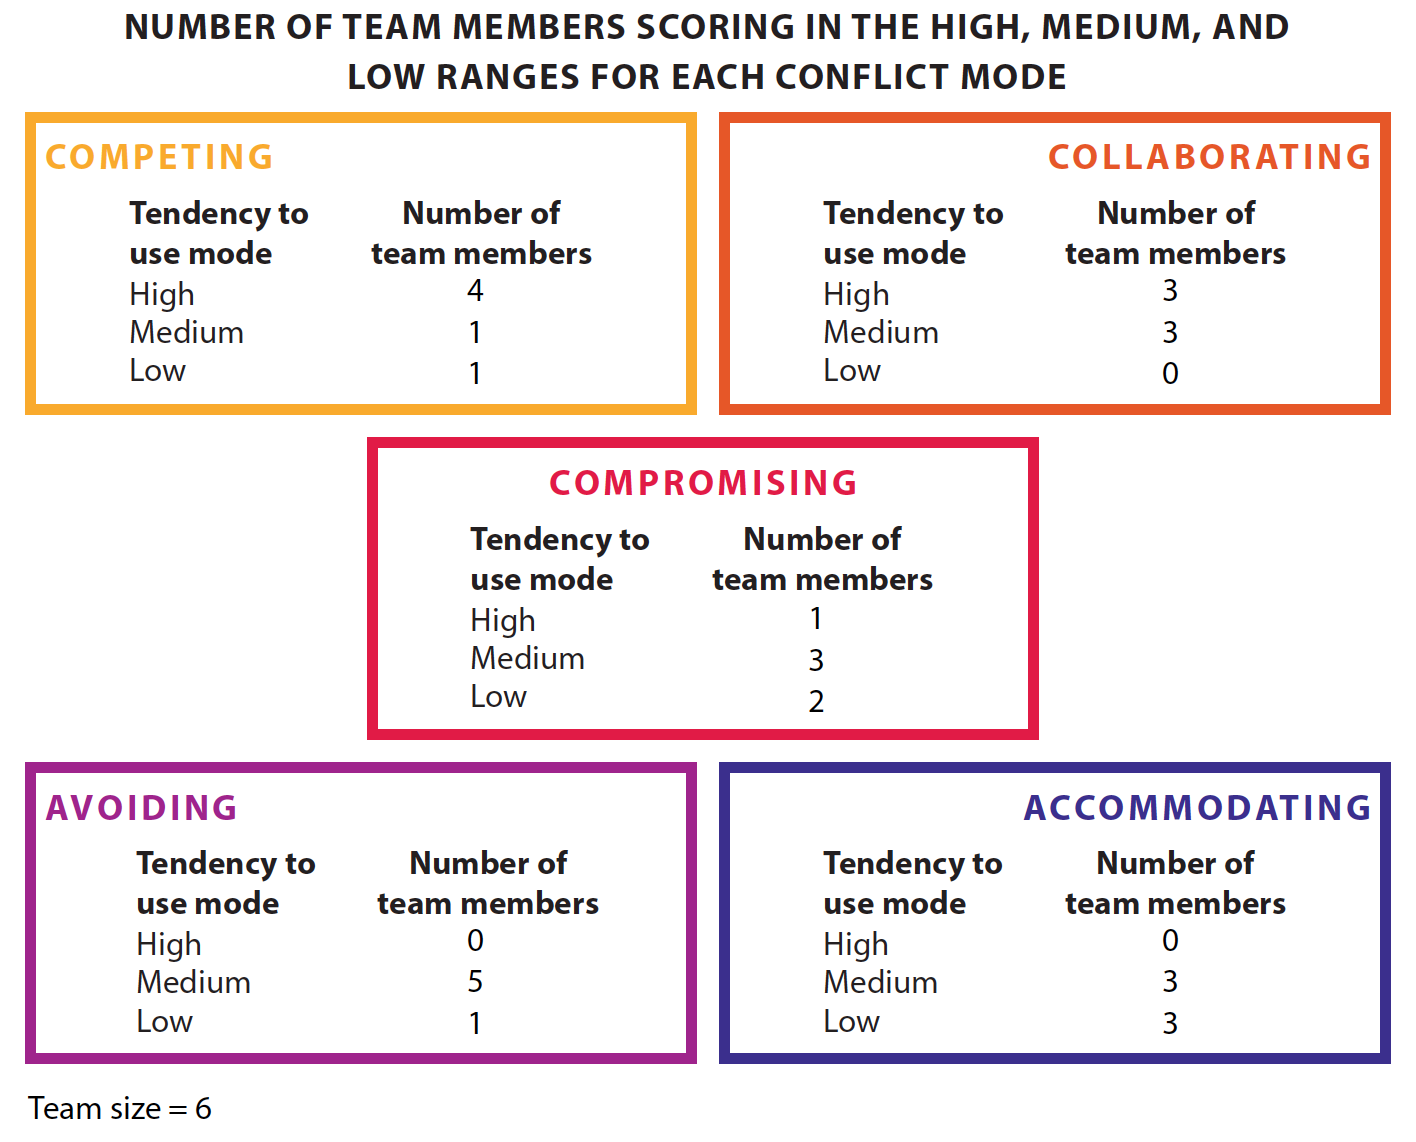 Conflict Mode Distribution of Team Members